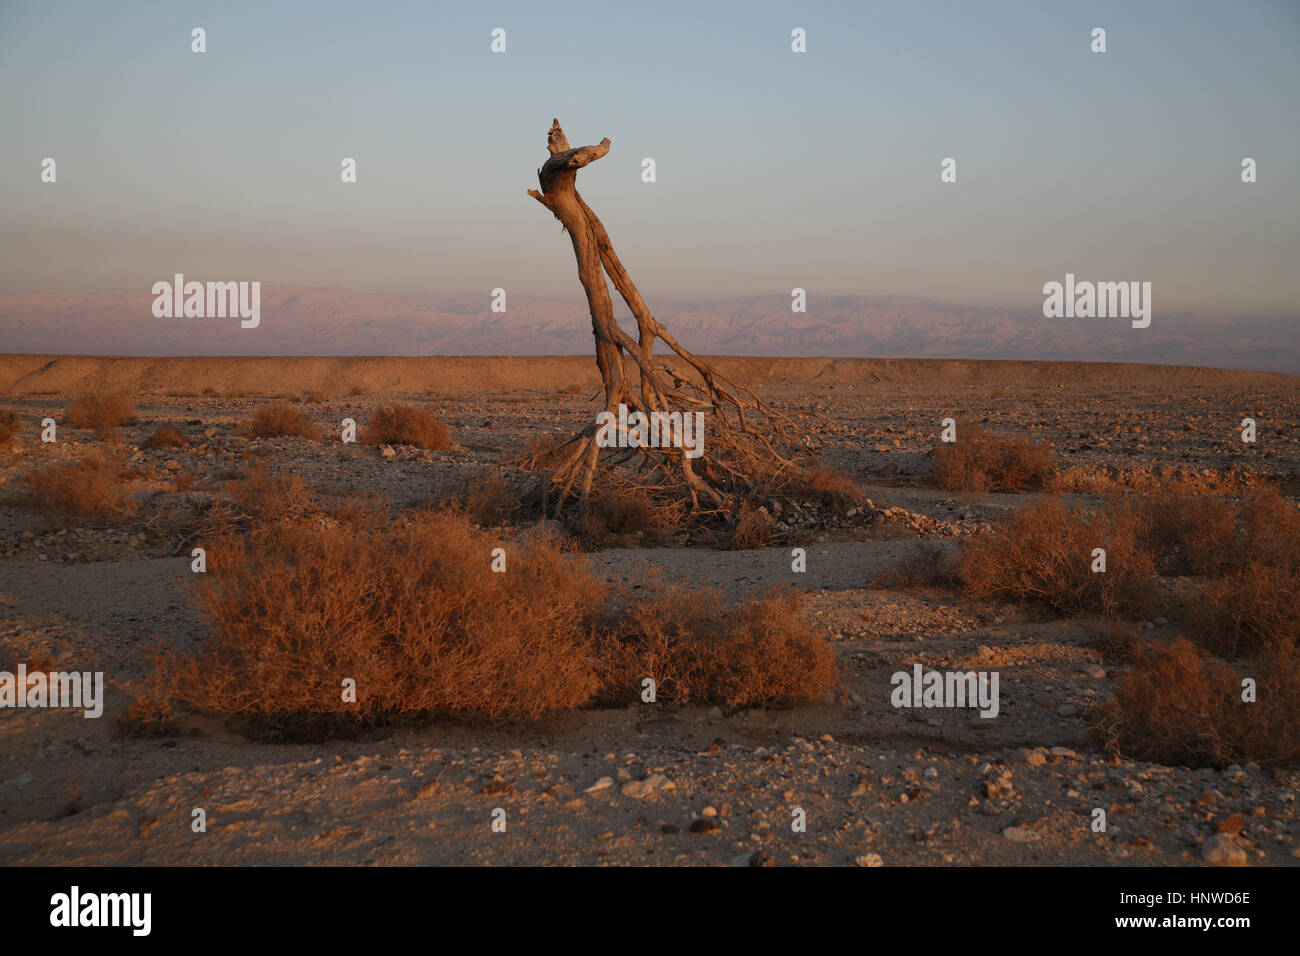 A dead upside down tree looking like a giraffe, carried here by a desert flash flood, seen afar are the Edom Mountains in Jordan, Arava Valley, Israel Stock Photo